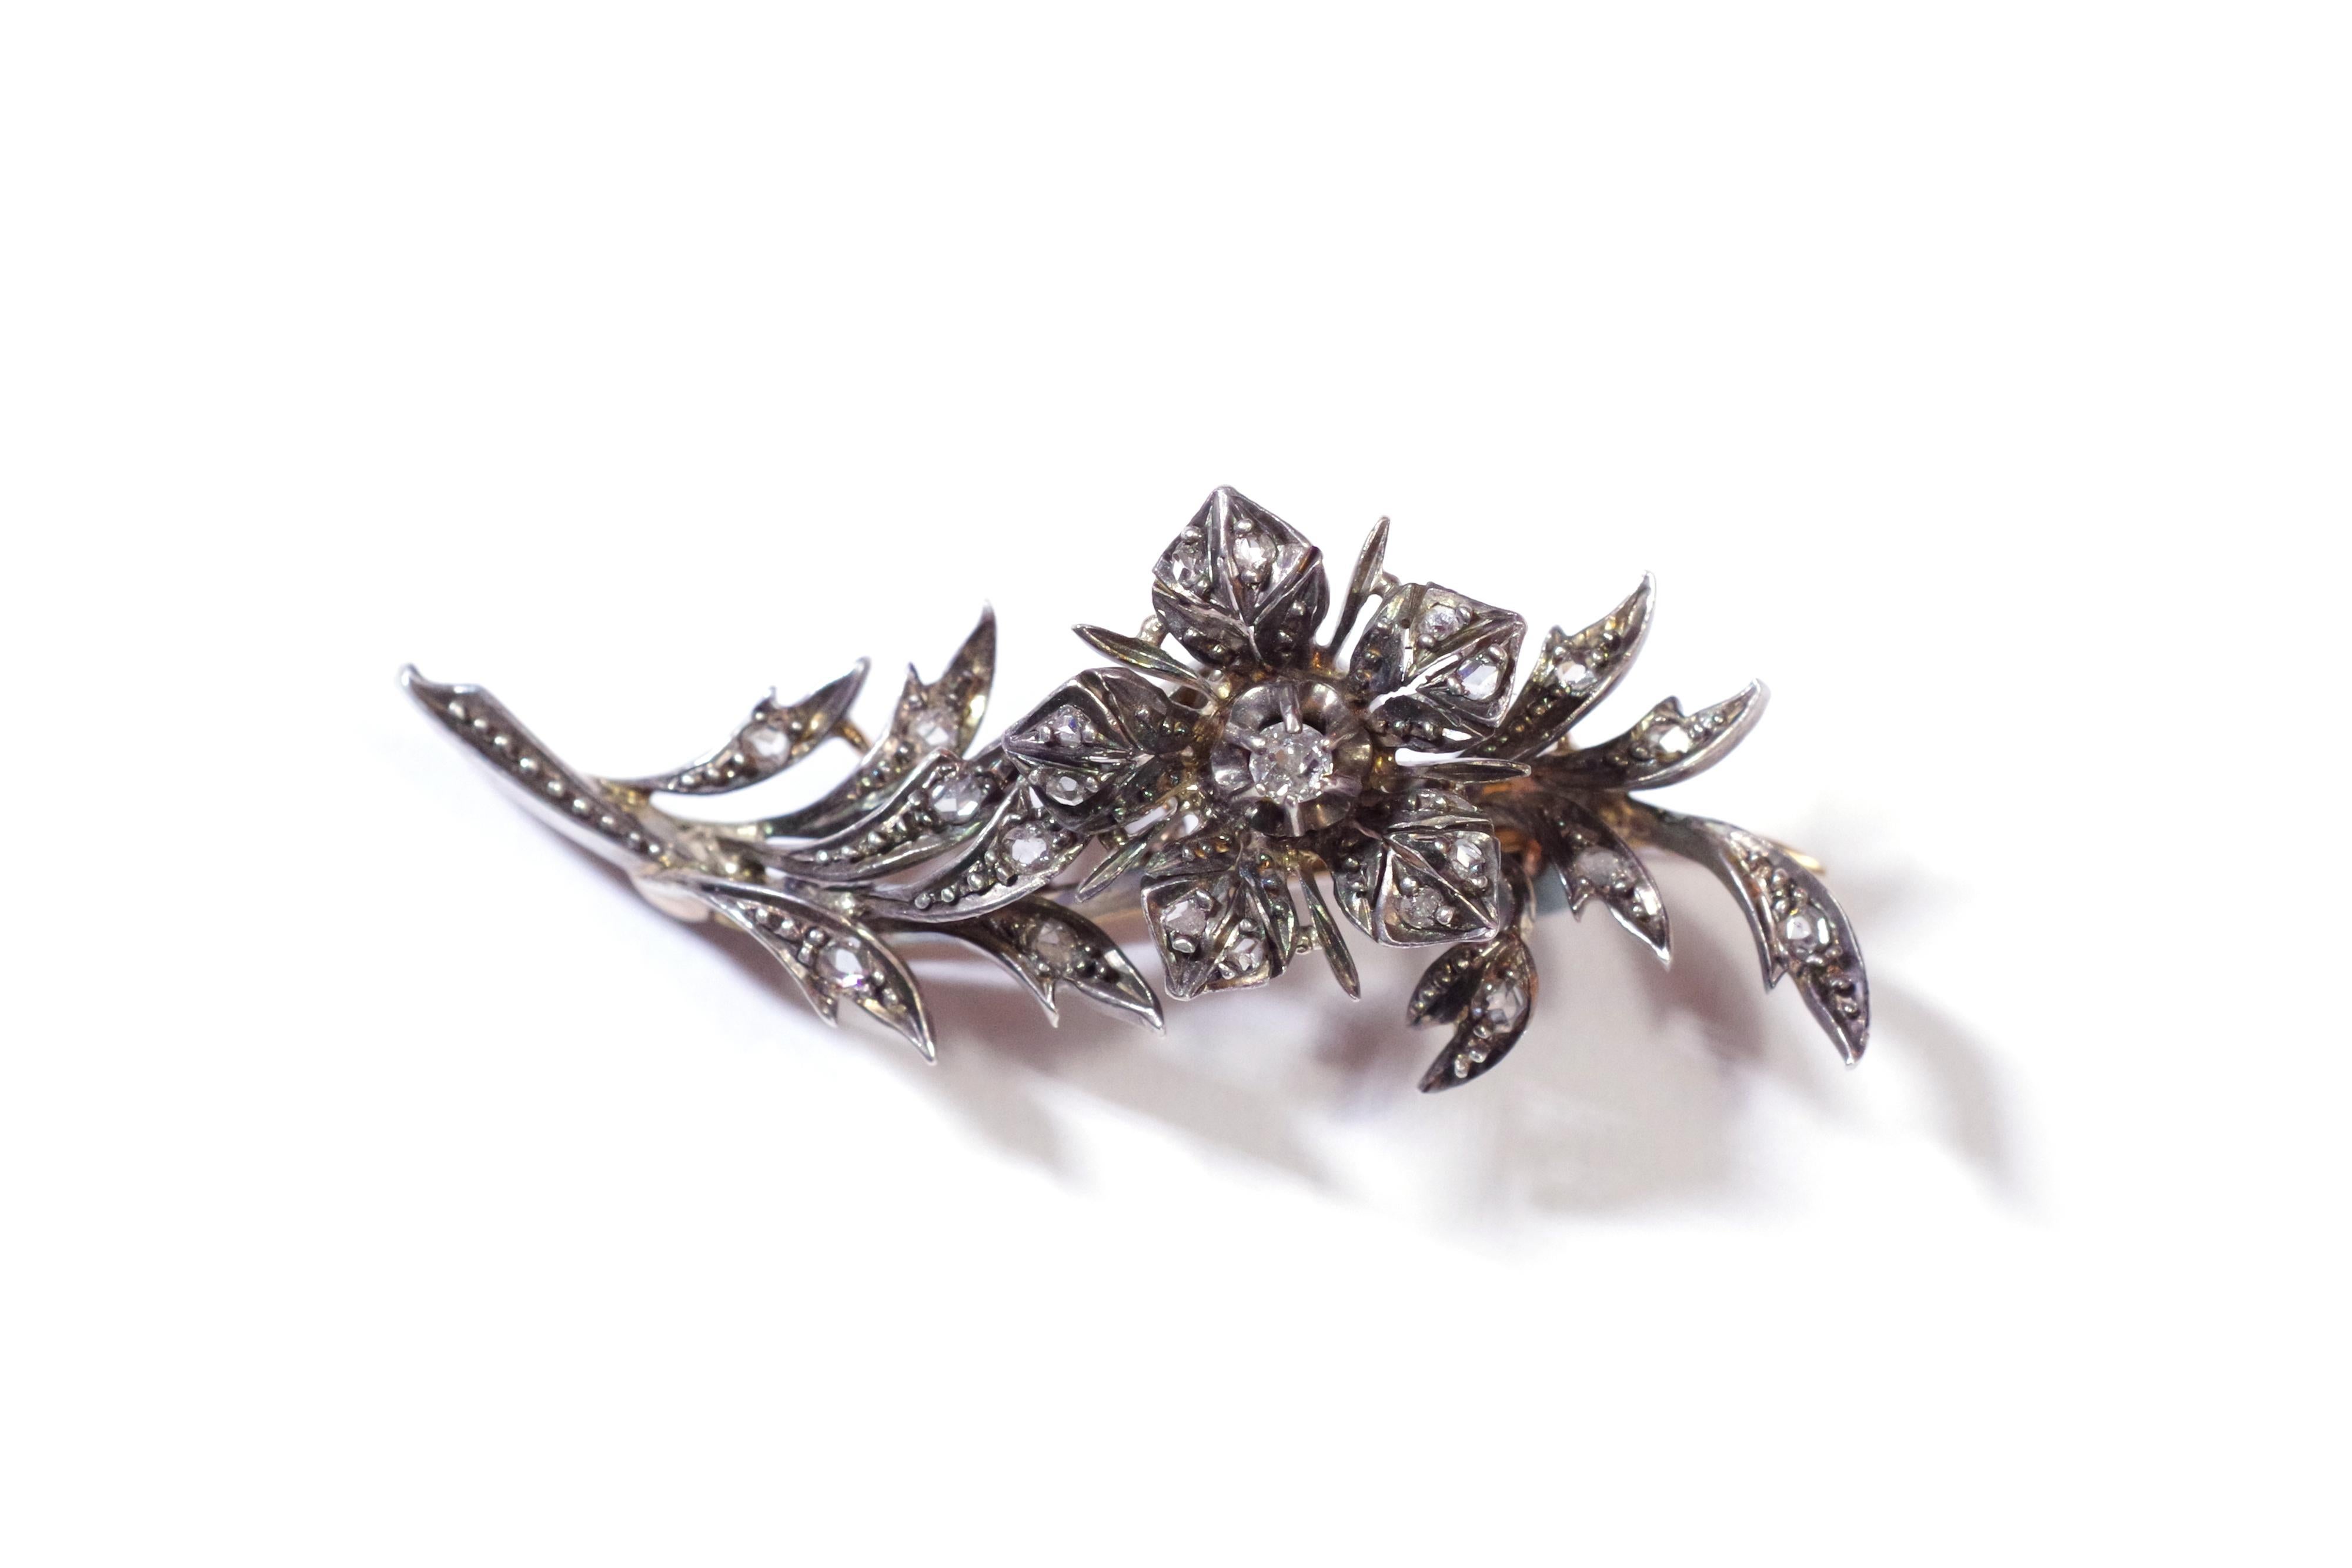 Diamond flower brooch tremblant in rose gold 18 karats and silver. Naturalist brooch representing a branch on which a flower is blooming. The flower is mounted on a spring which makes it vibrate when moved, hence the French name of the brooch 